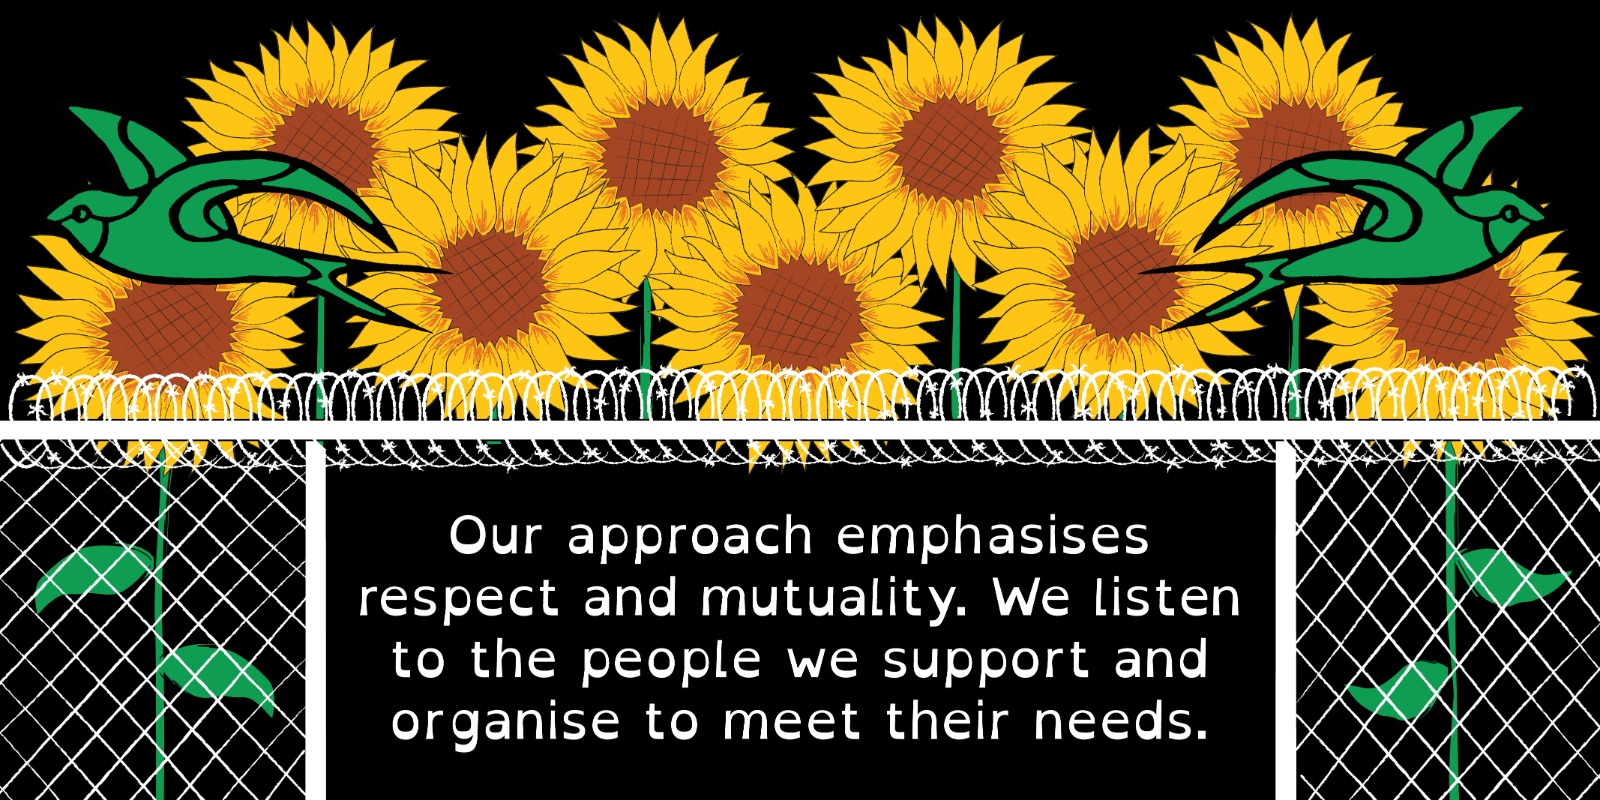 Our approach emphasises respect and mutuality. We listen to the people we support and organise to meet their needs.